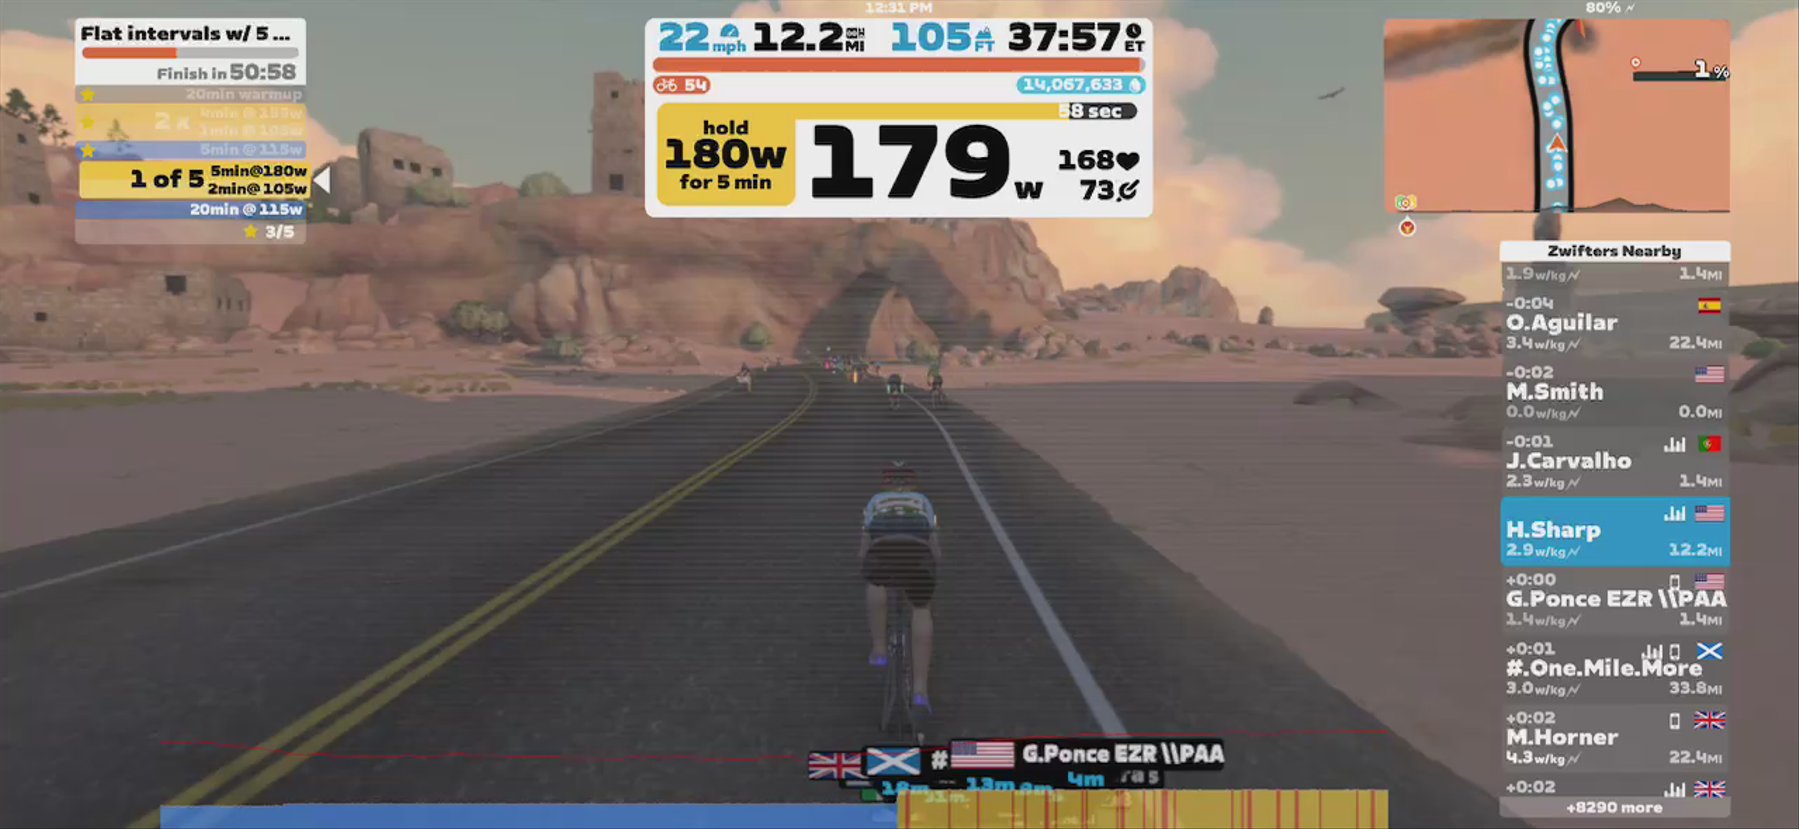 Zwift - Flat intervals w/ 5 x 5 min at threshold, phase I in Watopia